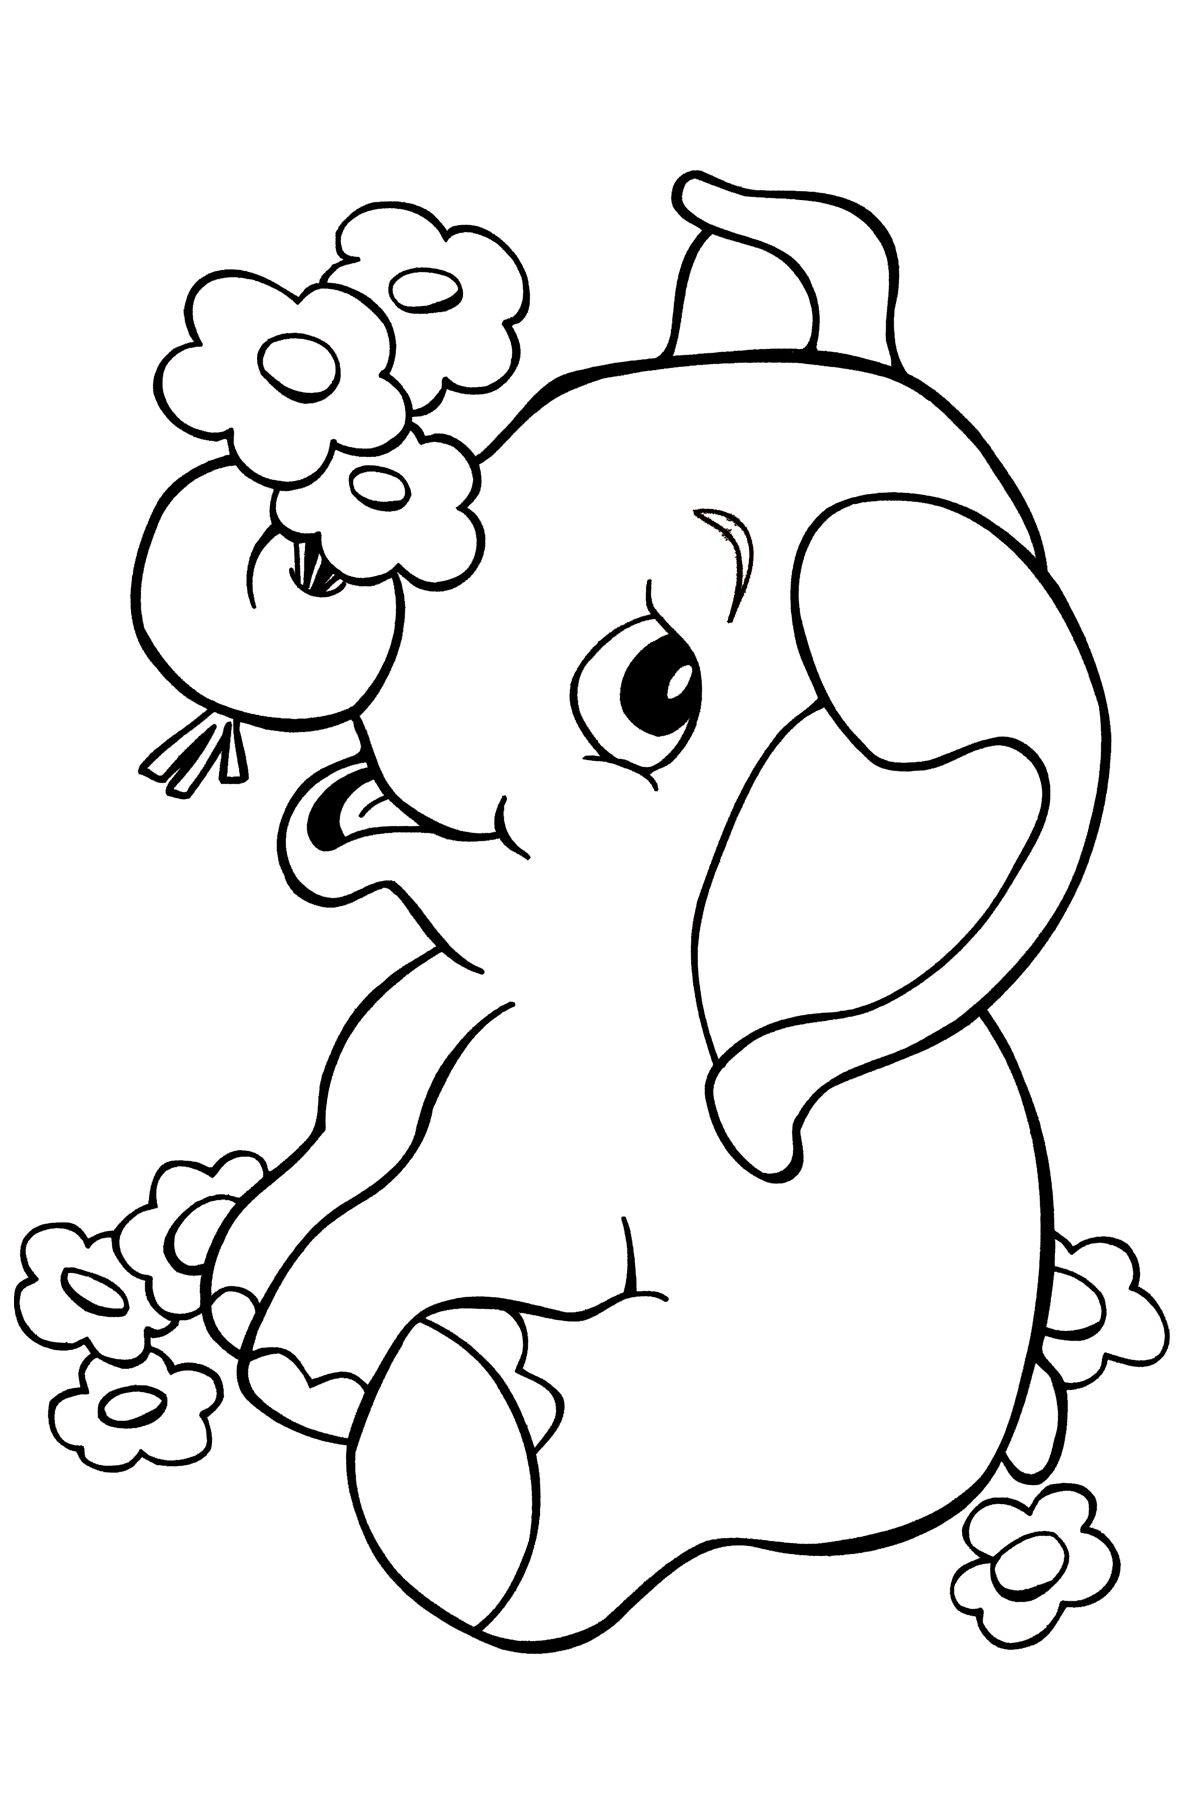 Baby Elephant Coloring Sheet
 Beautiful Elephant In The Jungle Coloring Pages